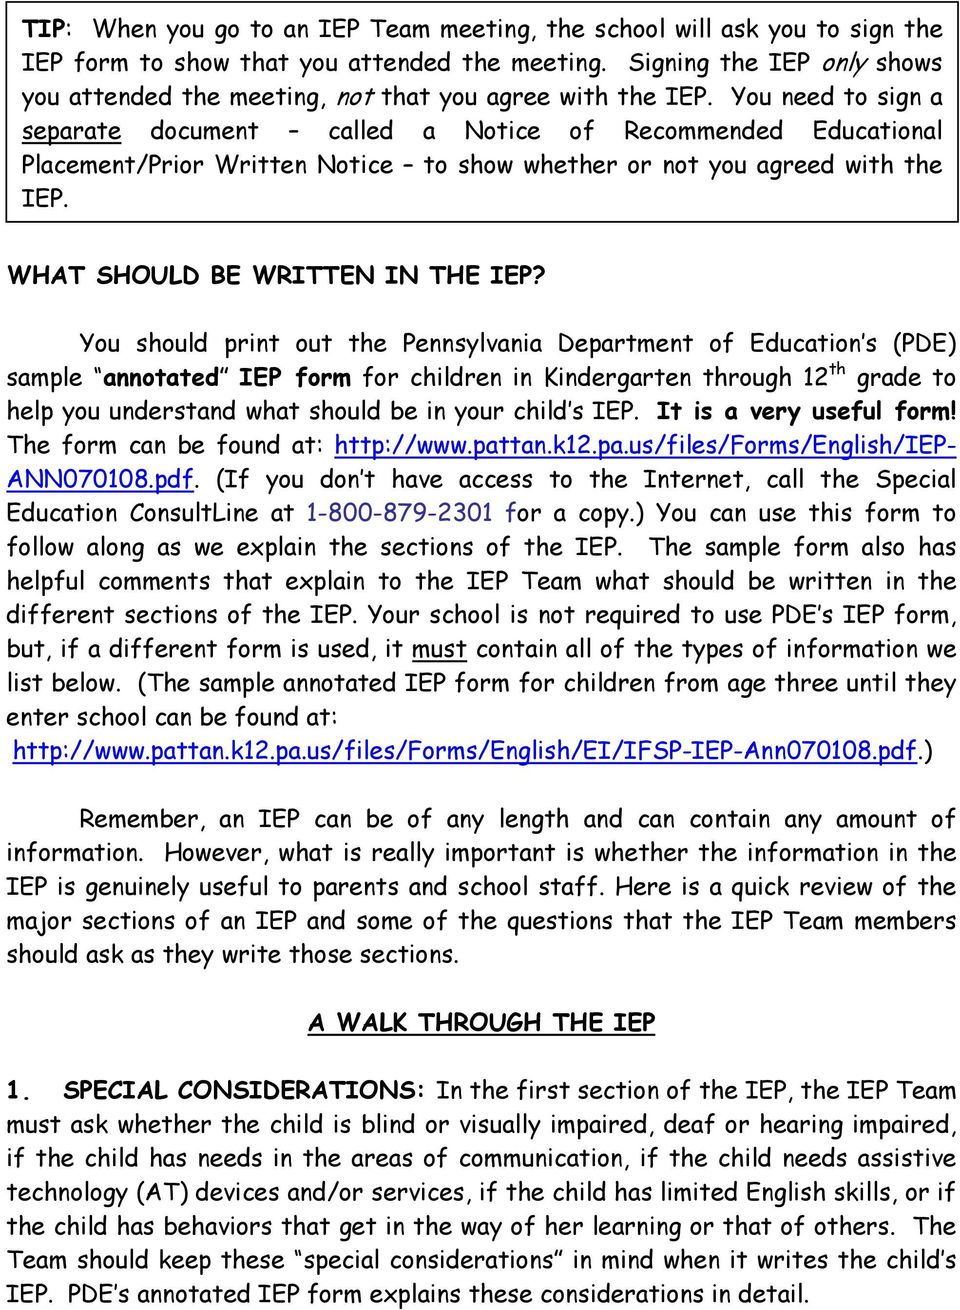 You need to sign a separate document called a Notice of Recommended Educational Placement/Prior Written Notice to show whether or not you agreed with the IEP. WHAT SHOULD BE WRITTEN IN THE IEP?